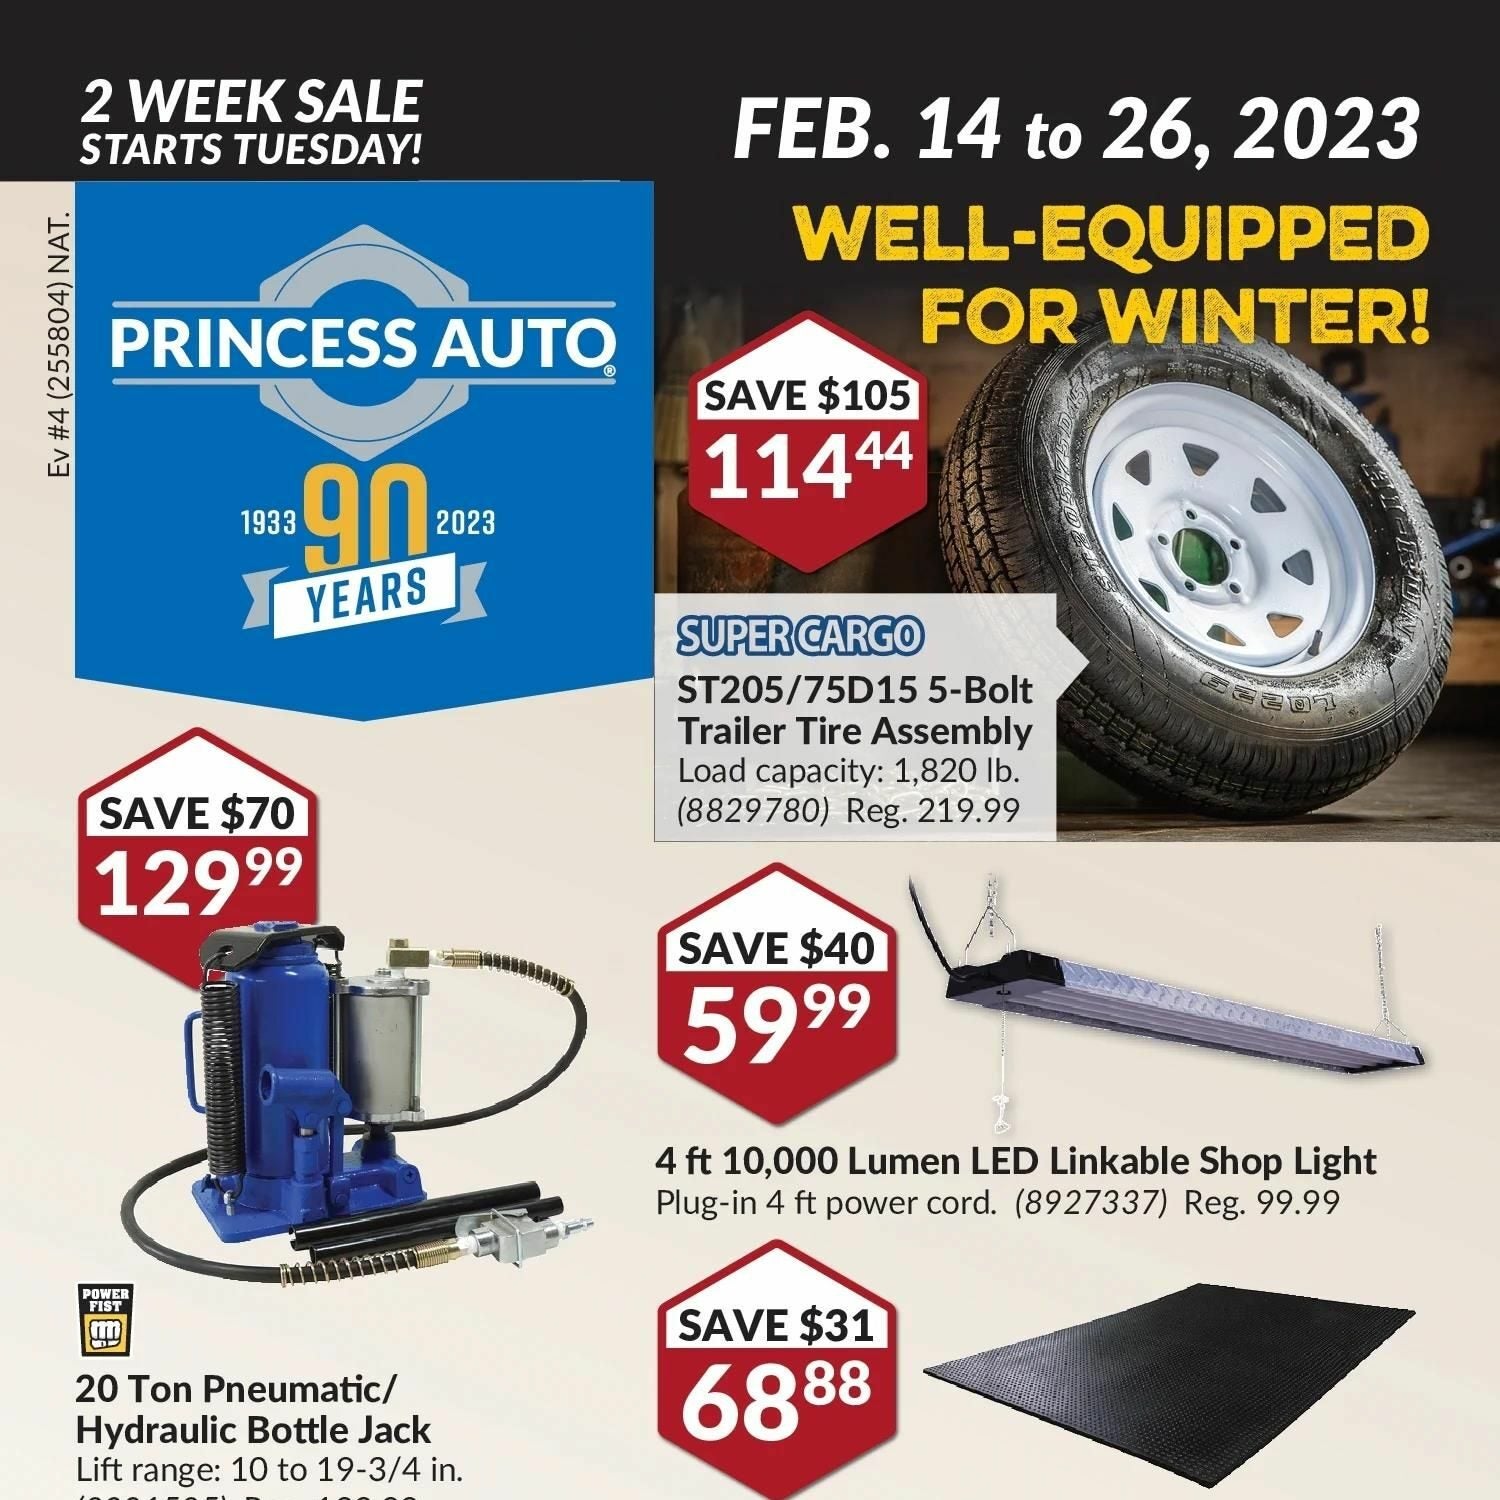 Princess Auto Weekly Flyer - 2 Week Sale - Well-Equipped For Winter - Feb  14 – 26 